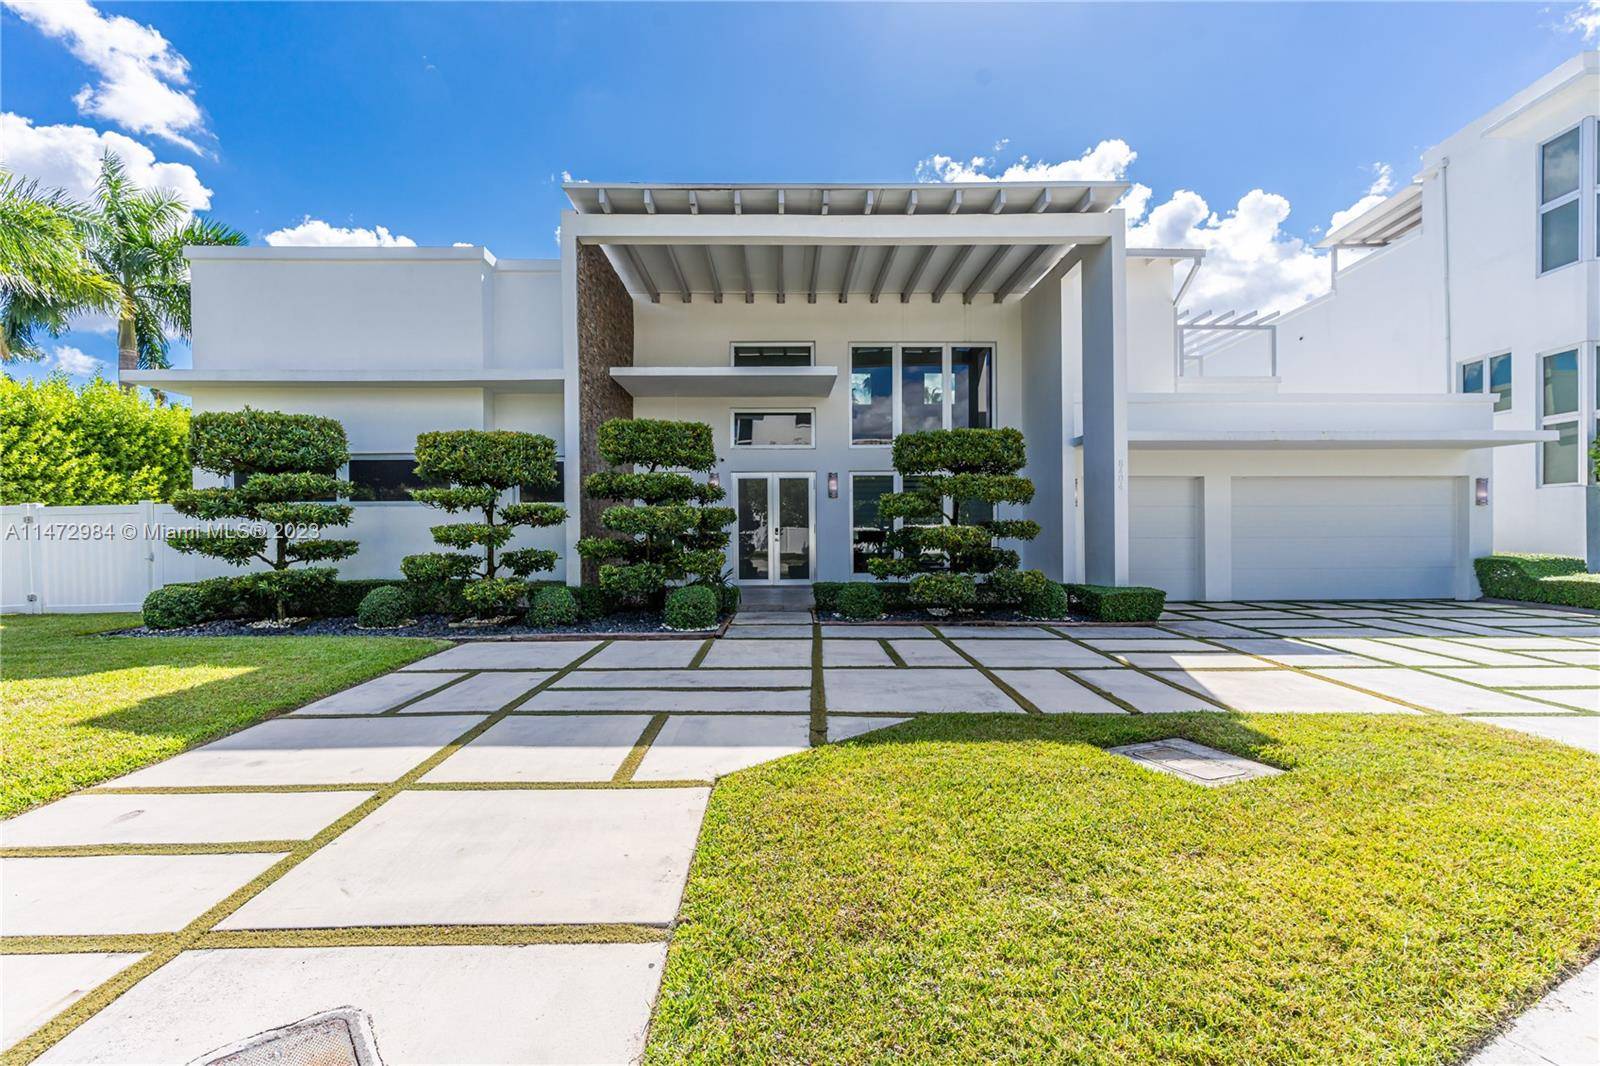 Spectacular home in the best area of Doral, the Oasis Park Square community, living area 3, 838 square feet for a total lot of 13, 086 SQFT, built in 2015, ...